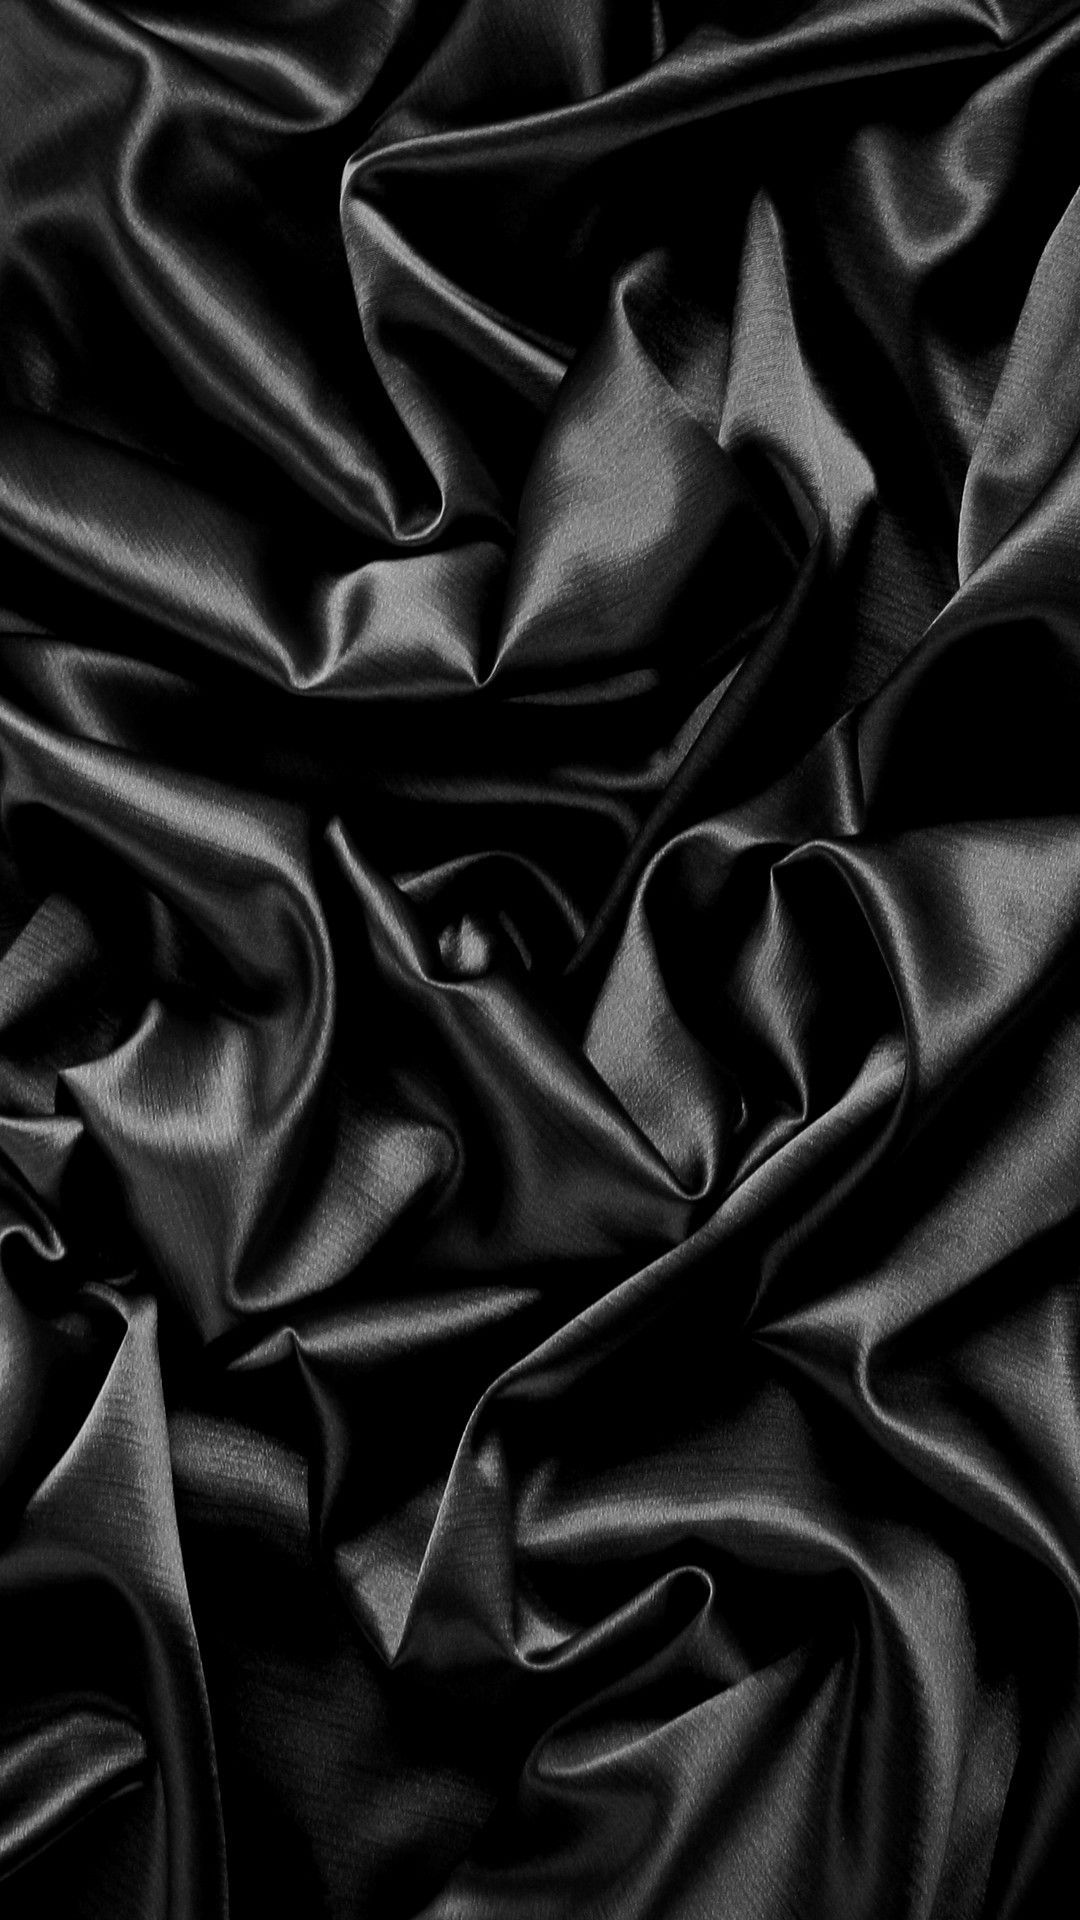 Black Silk iPhone 8 Wallpaper with high-resolution 1920x1080 pixel. You can use this wallpaper for your iPhone 5, 6, 7, 8, X, XS, XR backgrounds, Mobile Screensaver, or iPad Lock Screen - Silk, black